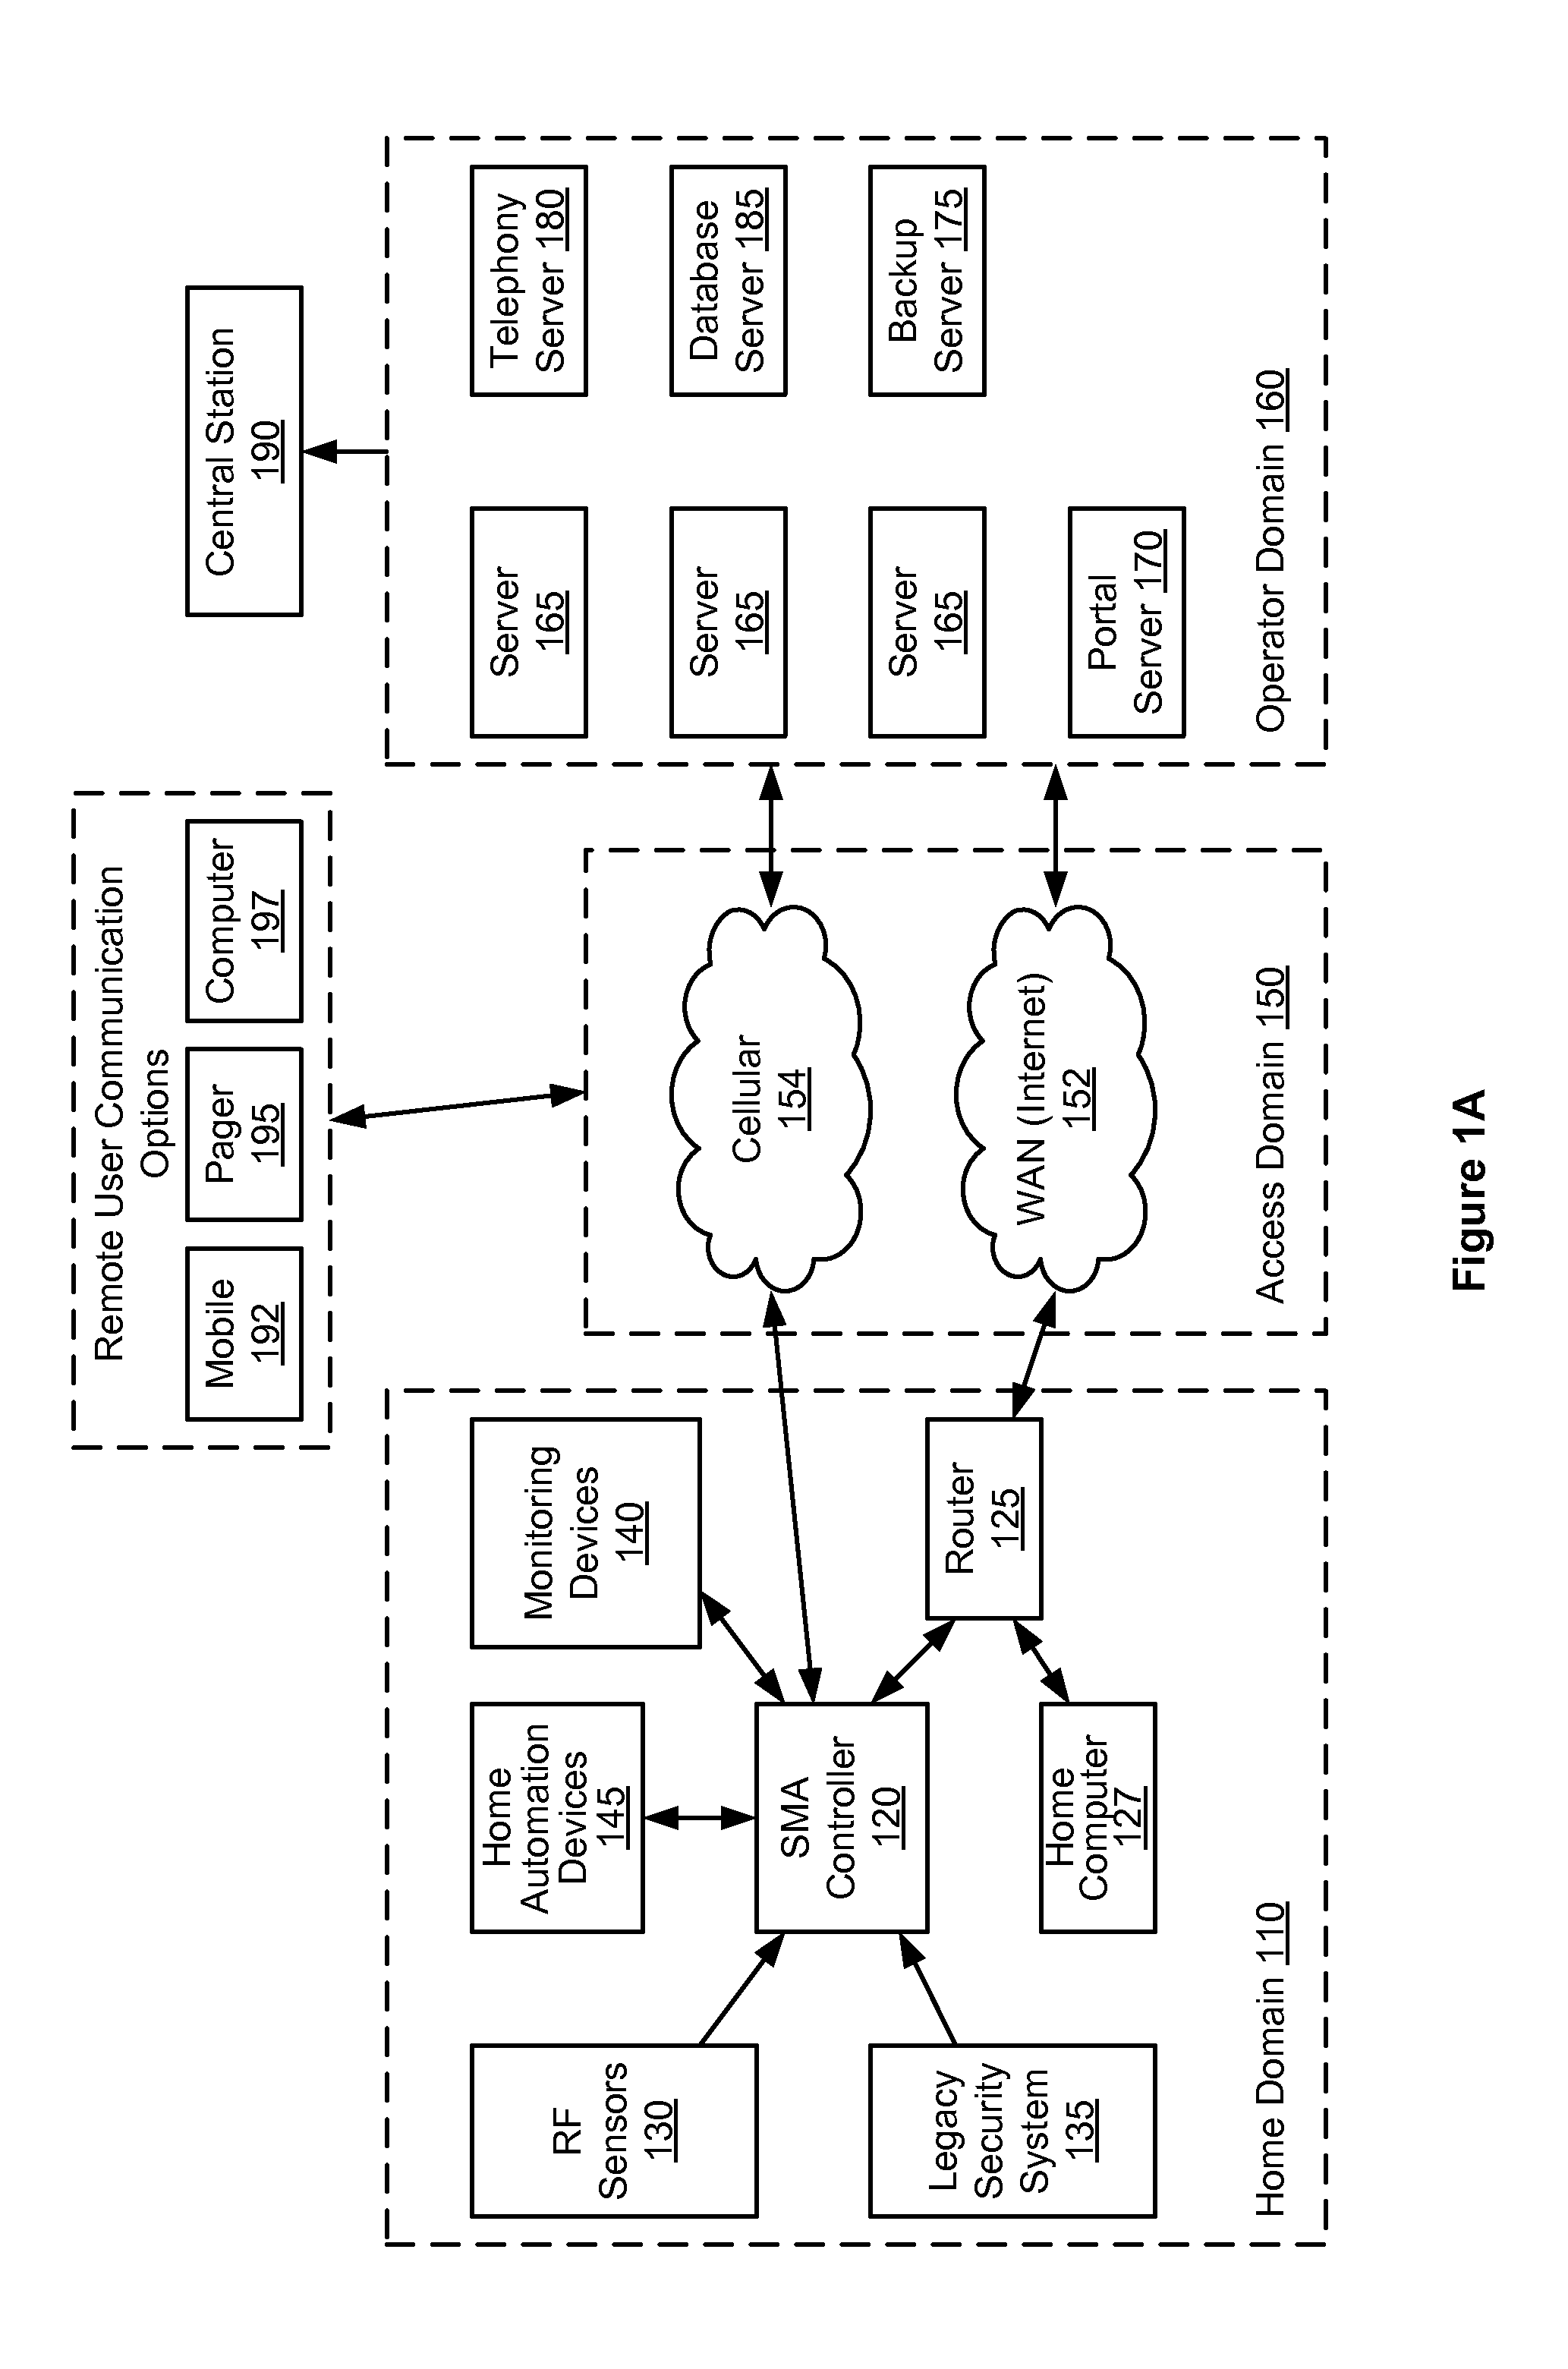 Method and system for logging security event data